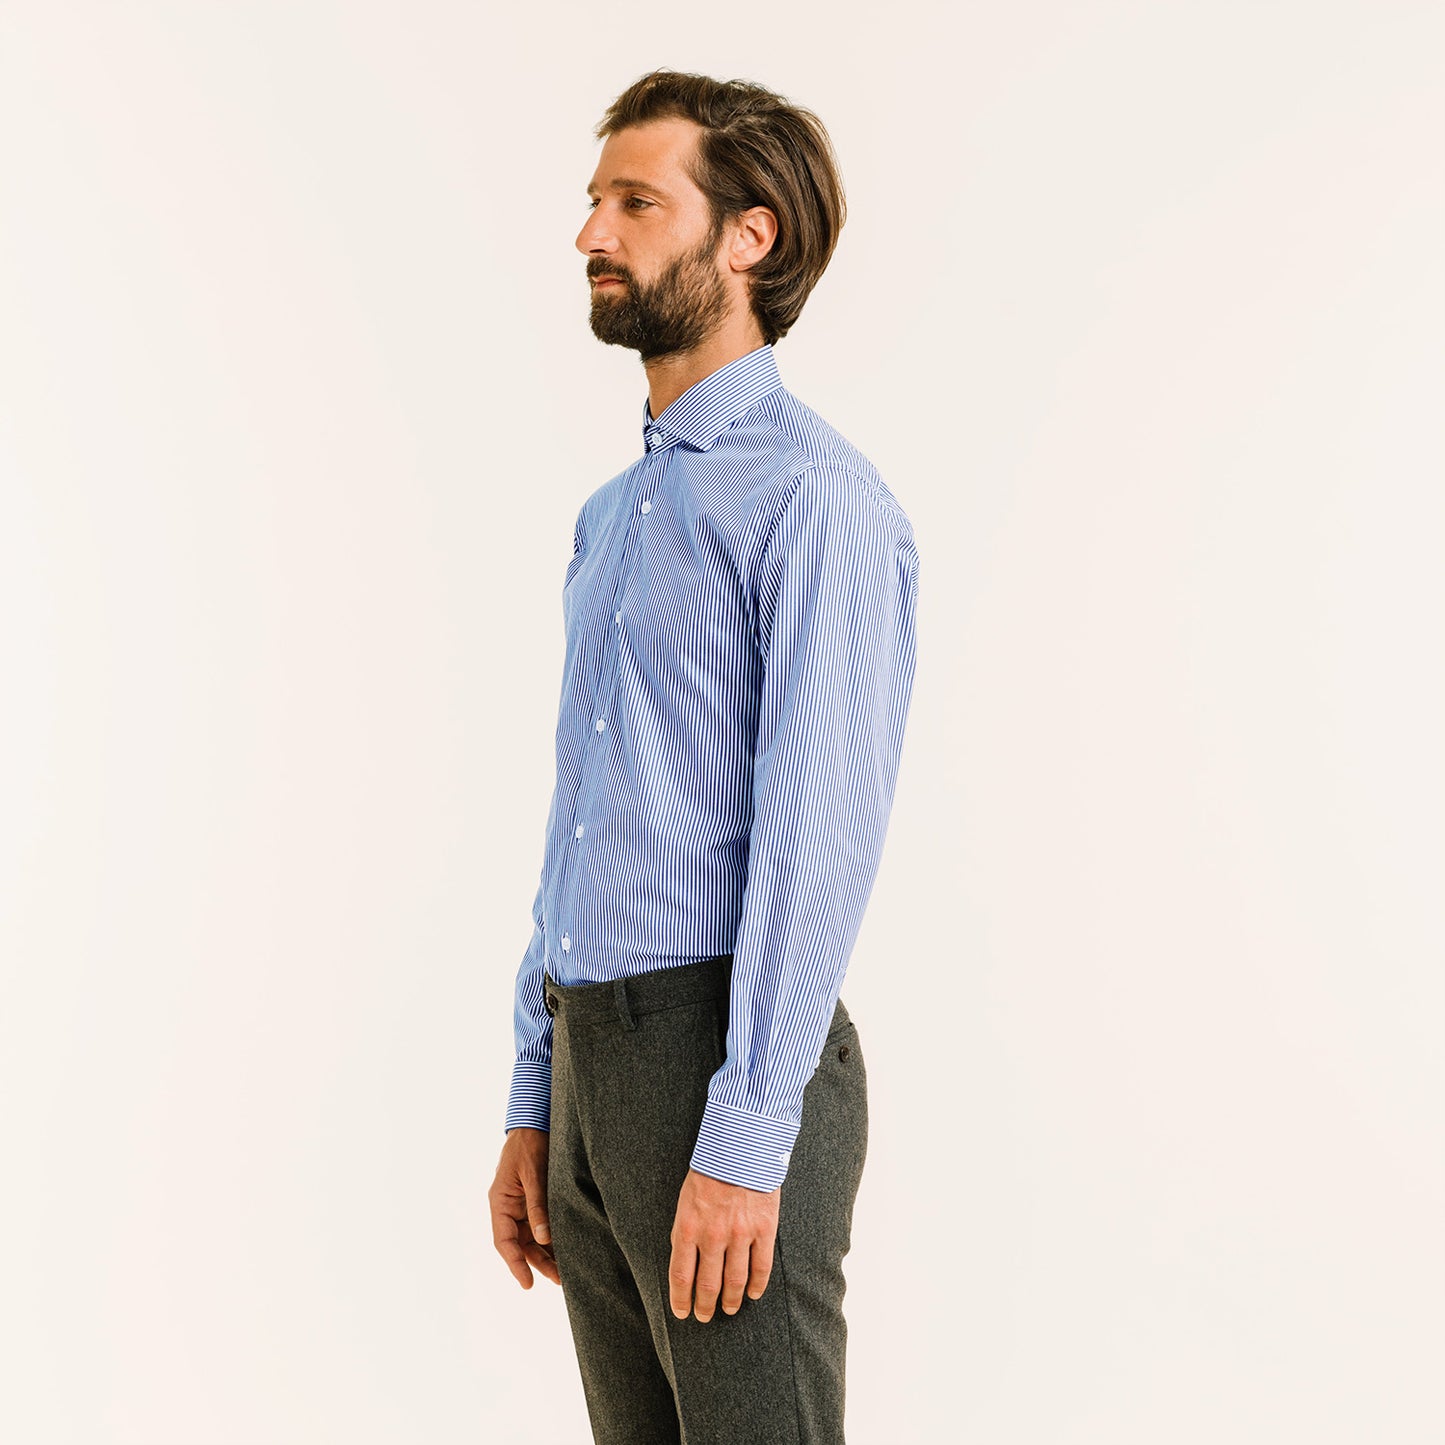 Fitted shirt in double-twisted poplin with dark blue stripes